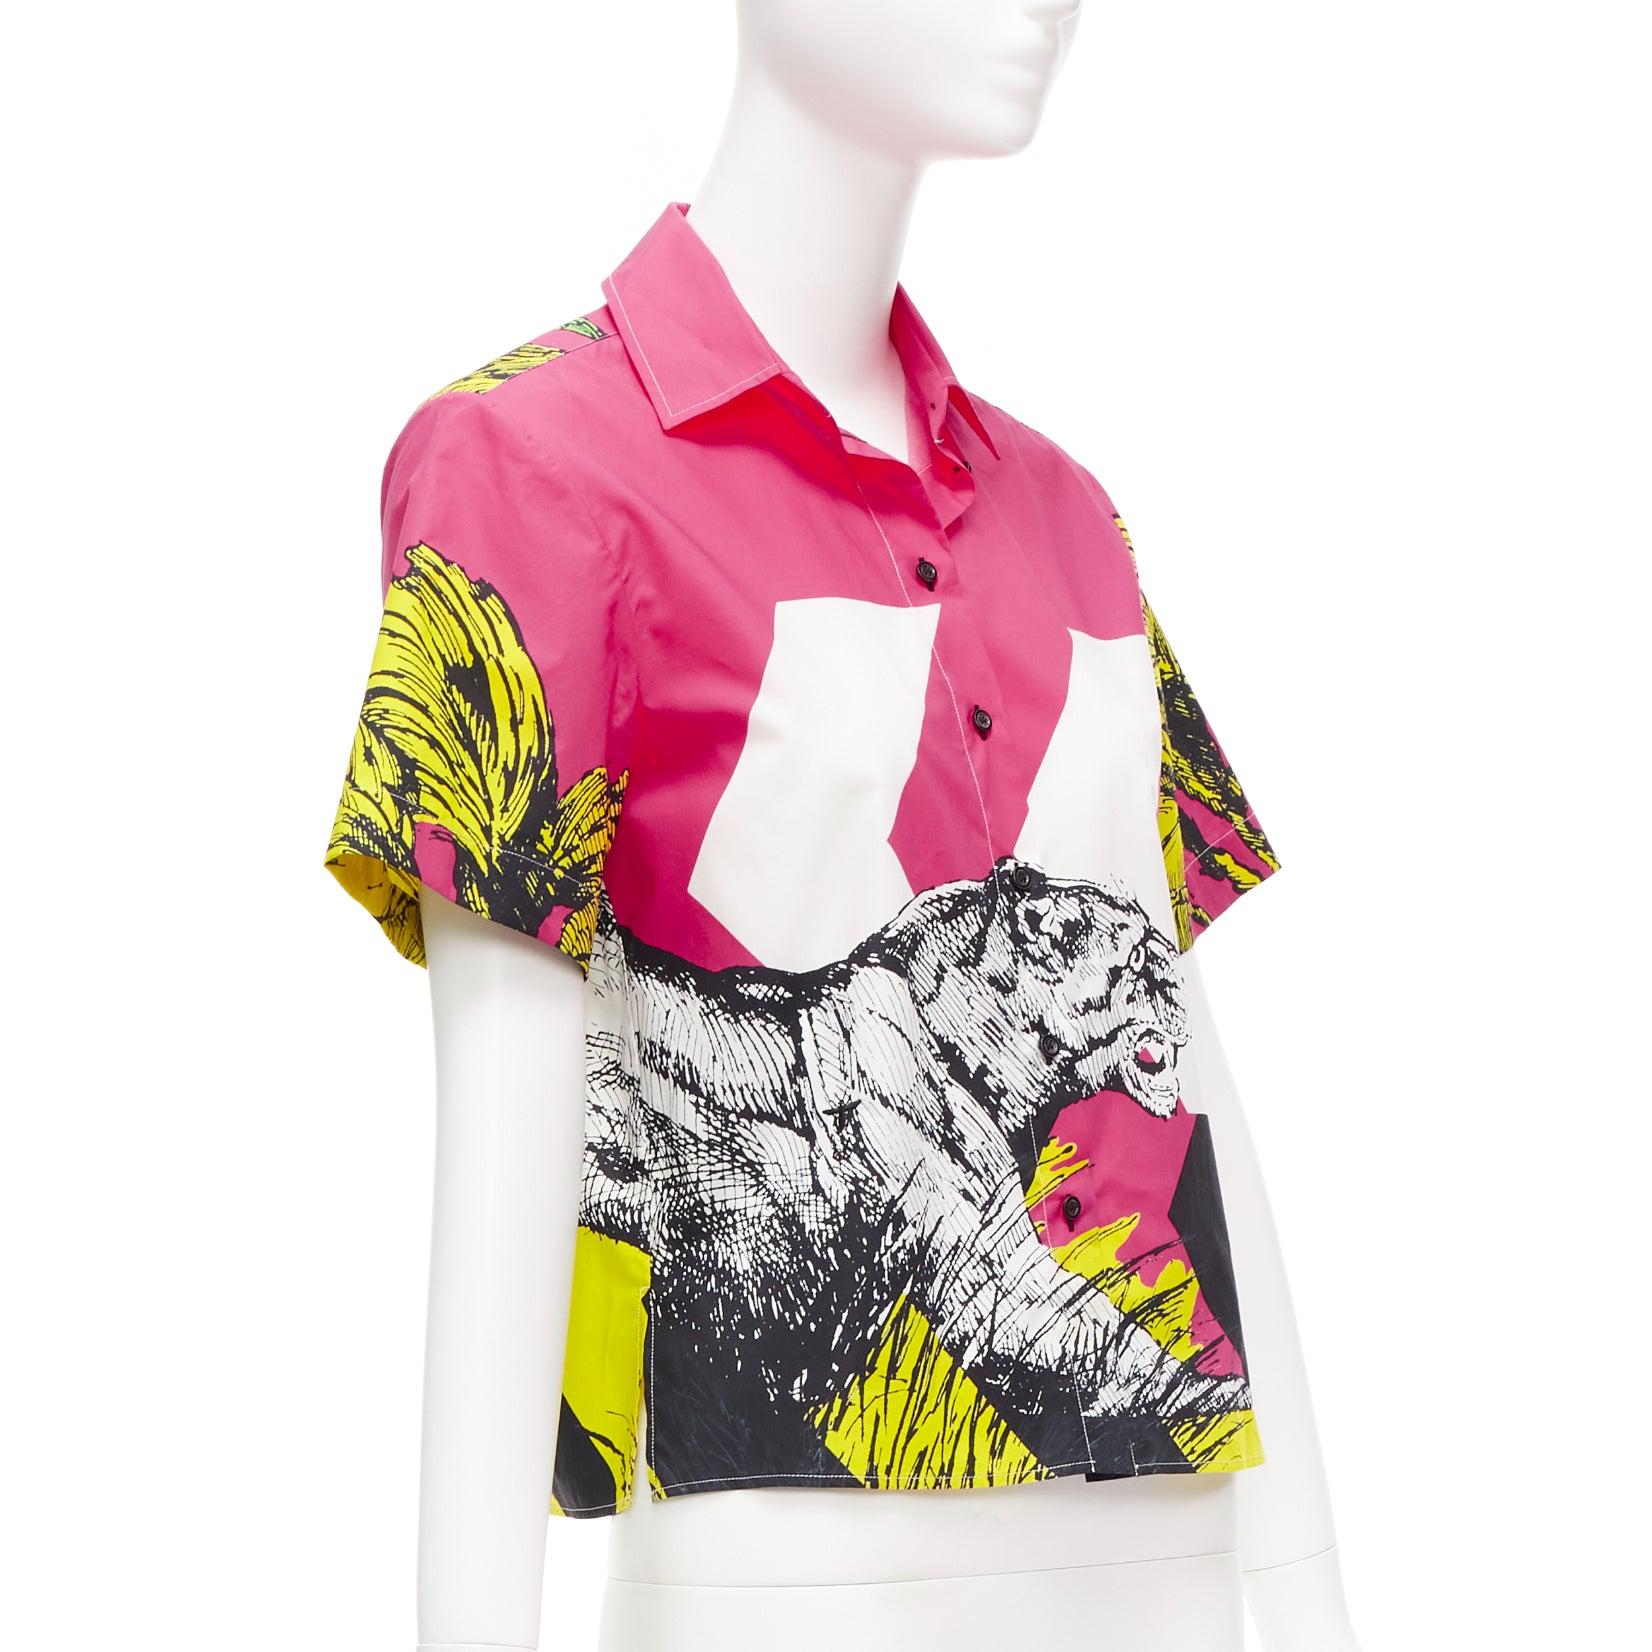 CHRISTIAN DIOR D-Jungle Pop Tiger pink print poplin short sleeve shirt FR34 XS
Reference: AAWC/A00673
Brand: Christian Dior
Designer: Maria Grazia Chiuri
Collection: D-Jungle
Material: Cotton
Color: Pink
Pattern: Graphic
Closure: Button
Extra